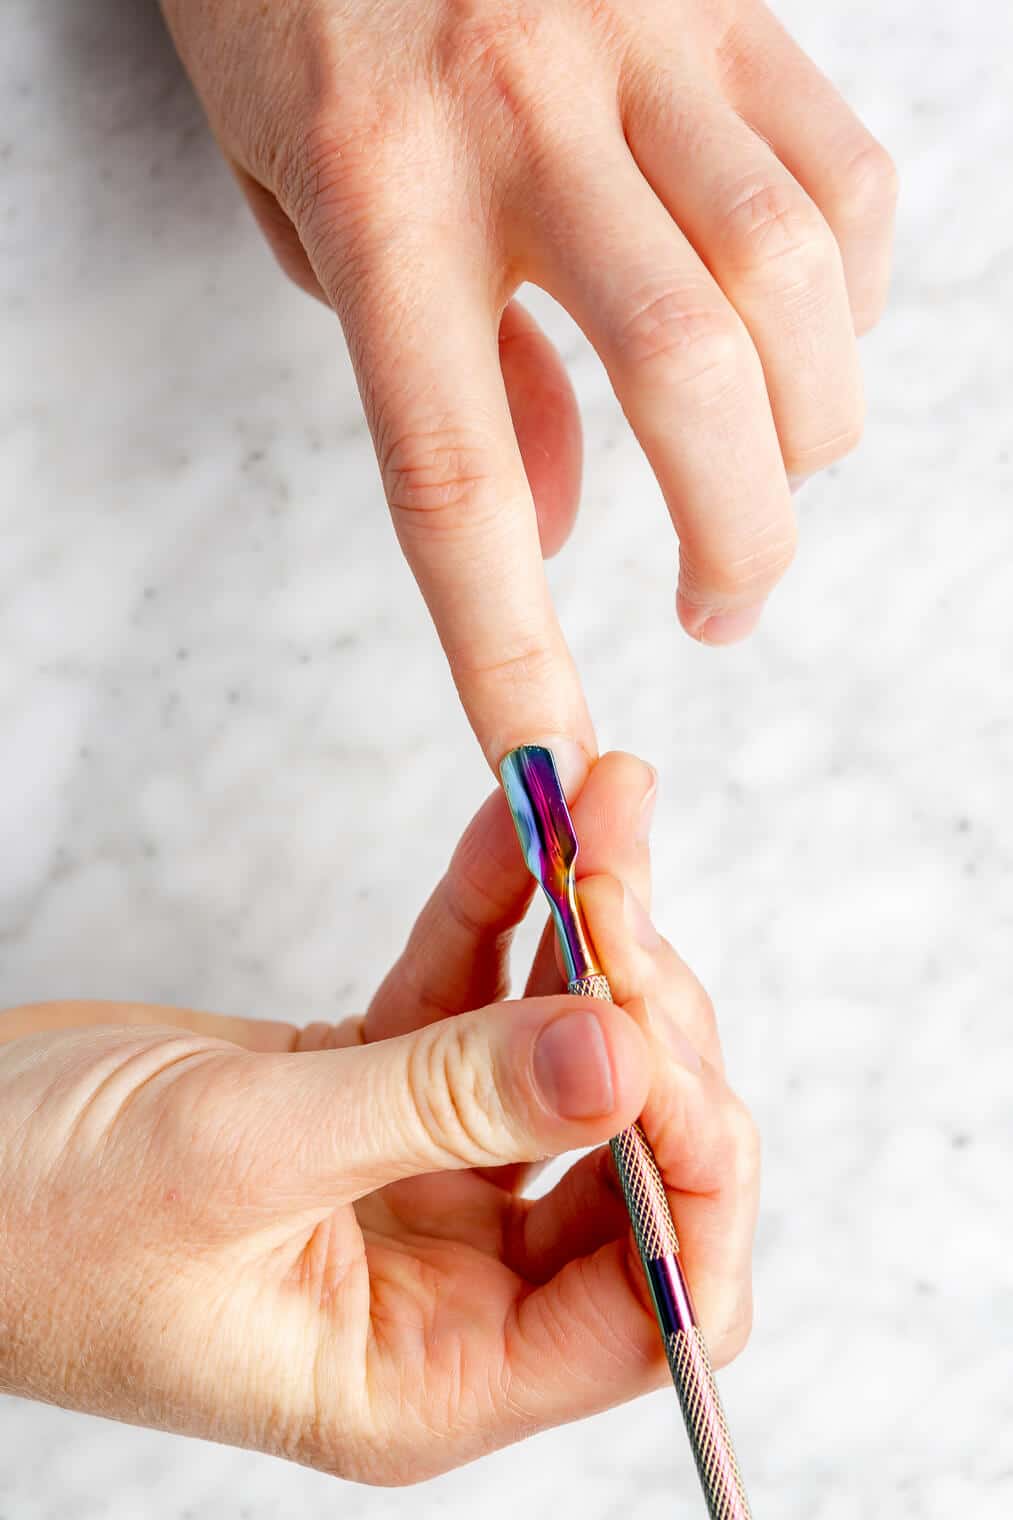 Hand holding cuticle tool pushing back cuticles on other hand.